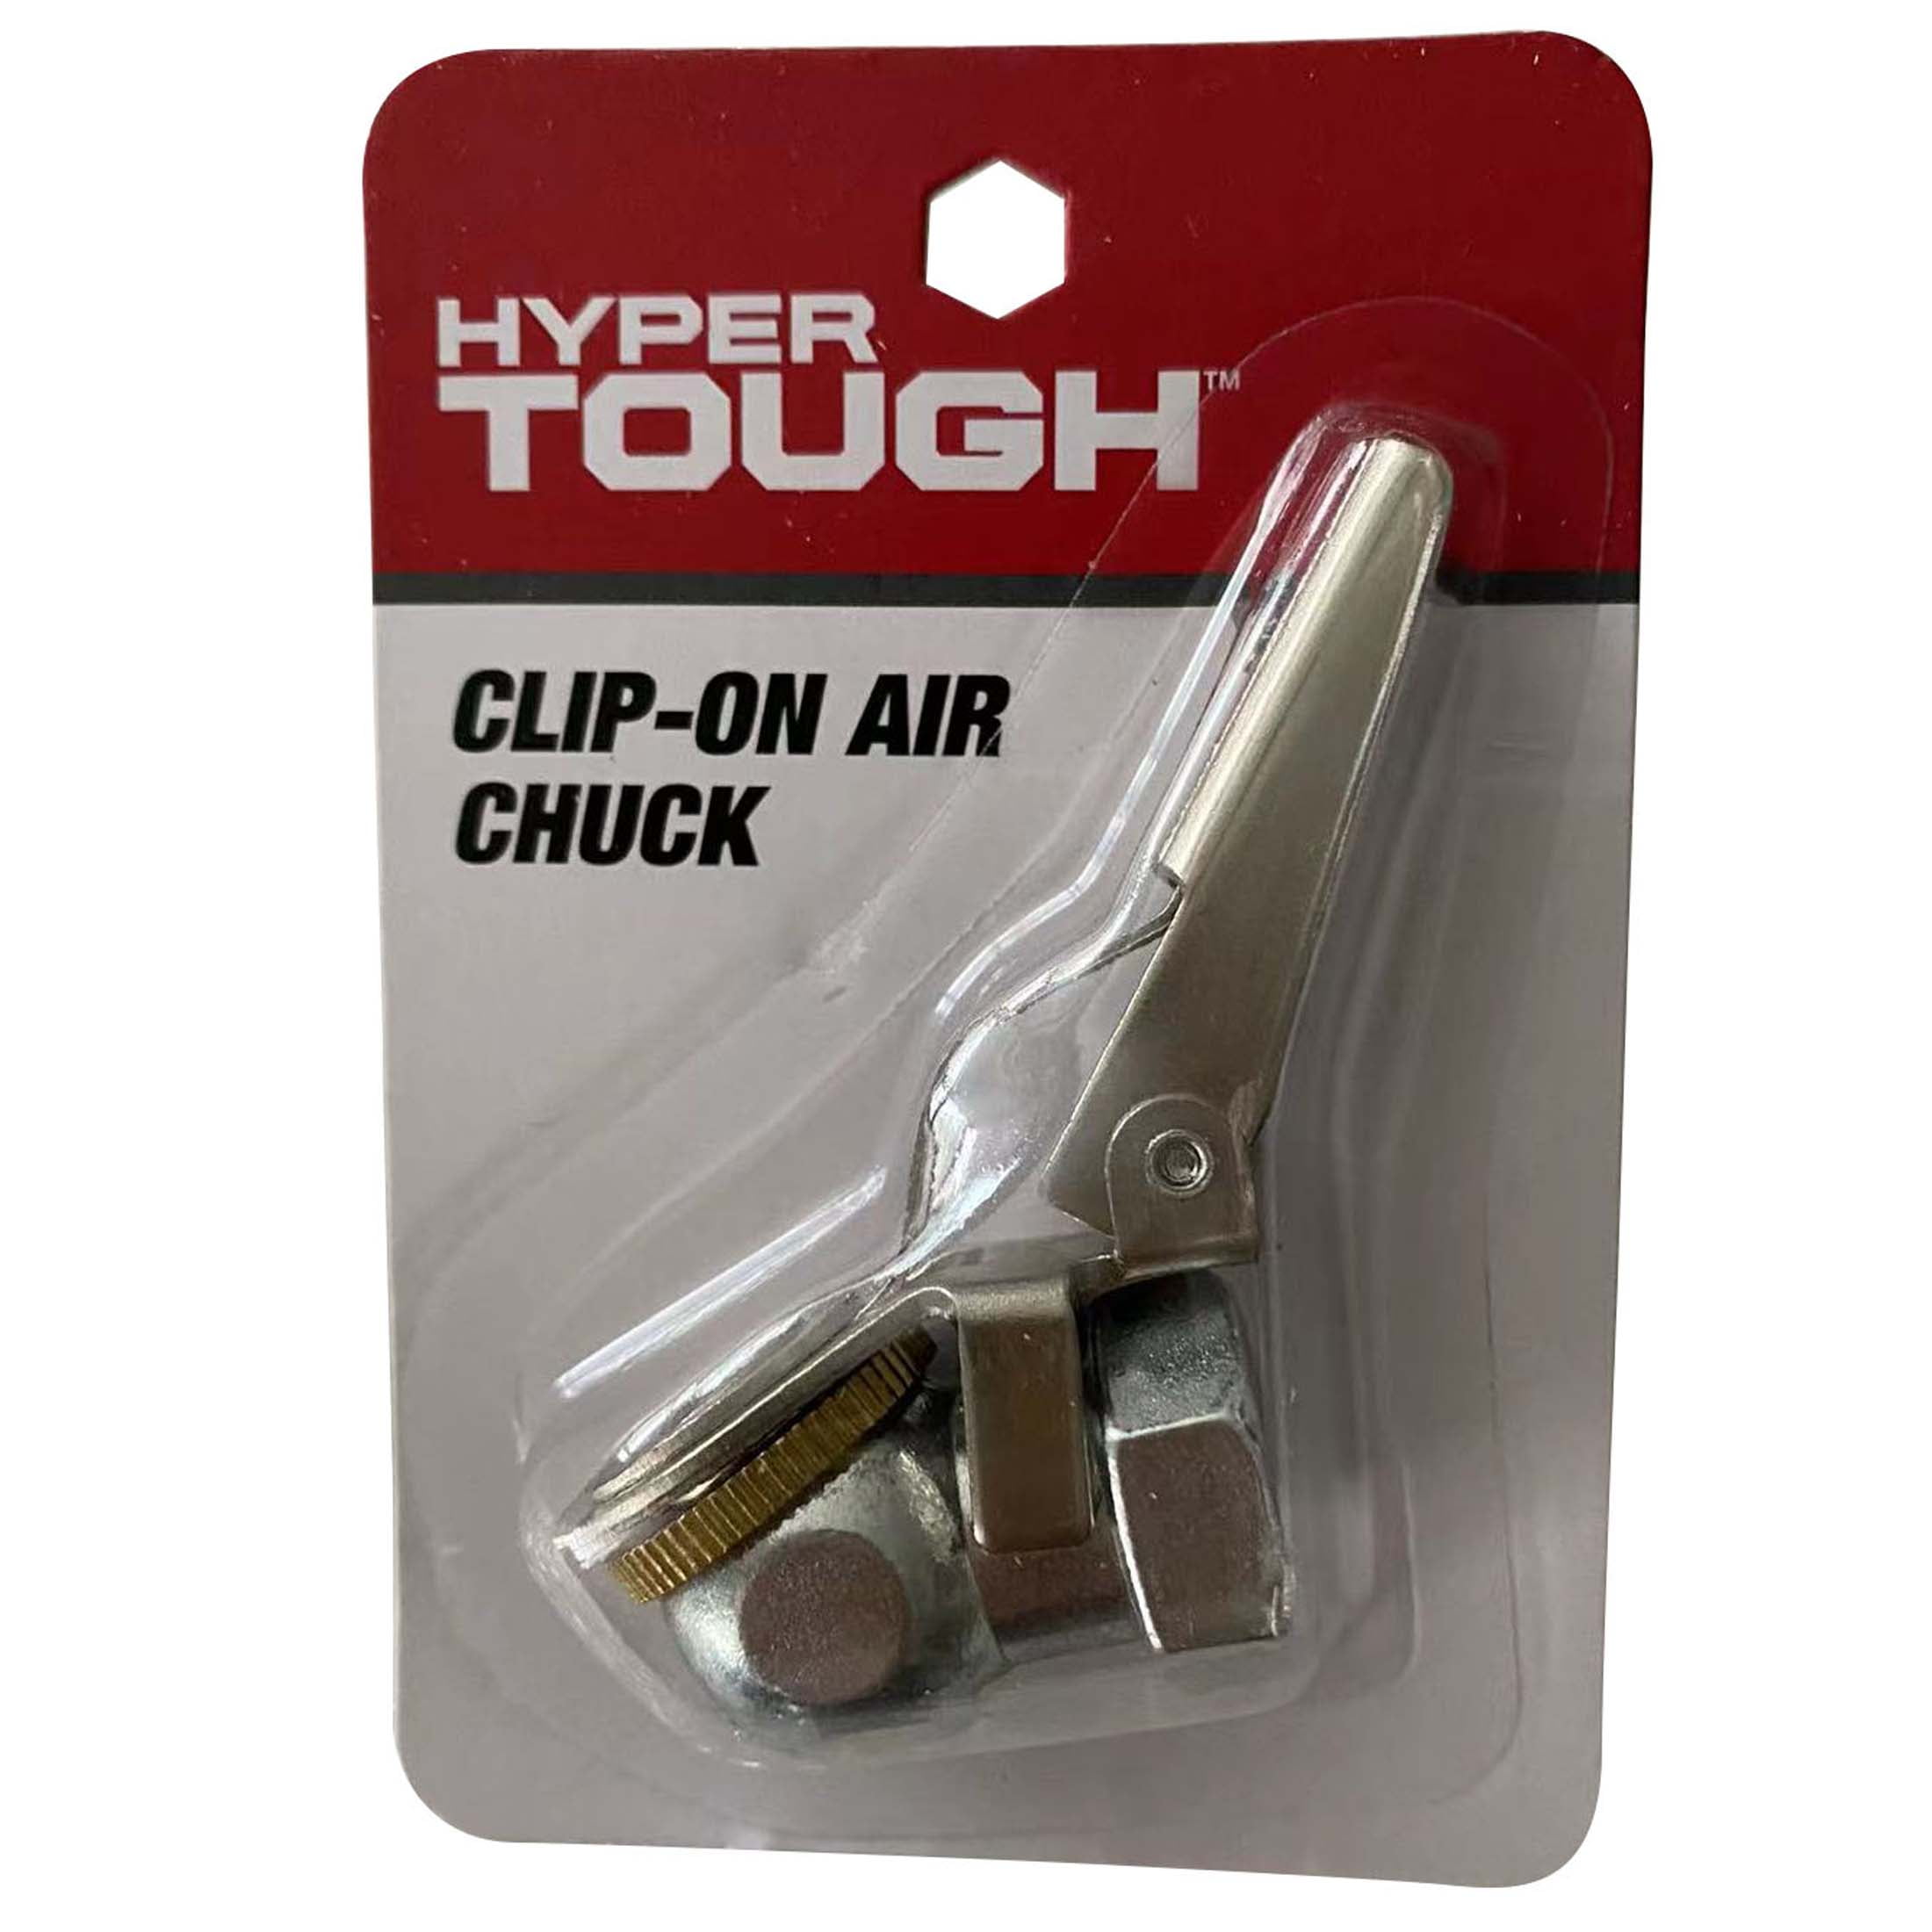 Hyper Tough Air Chuck with Clip 1/4-inch Female Thread with No Skin Type and Scent, 17-353HT